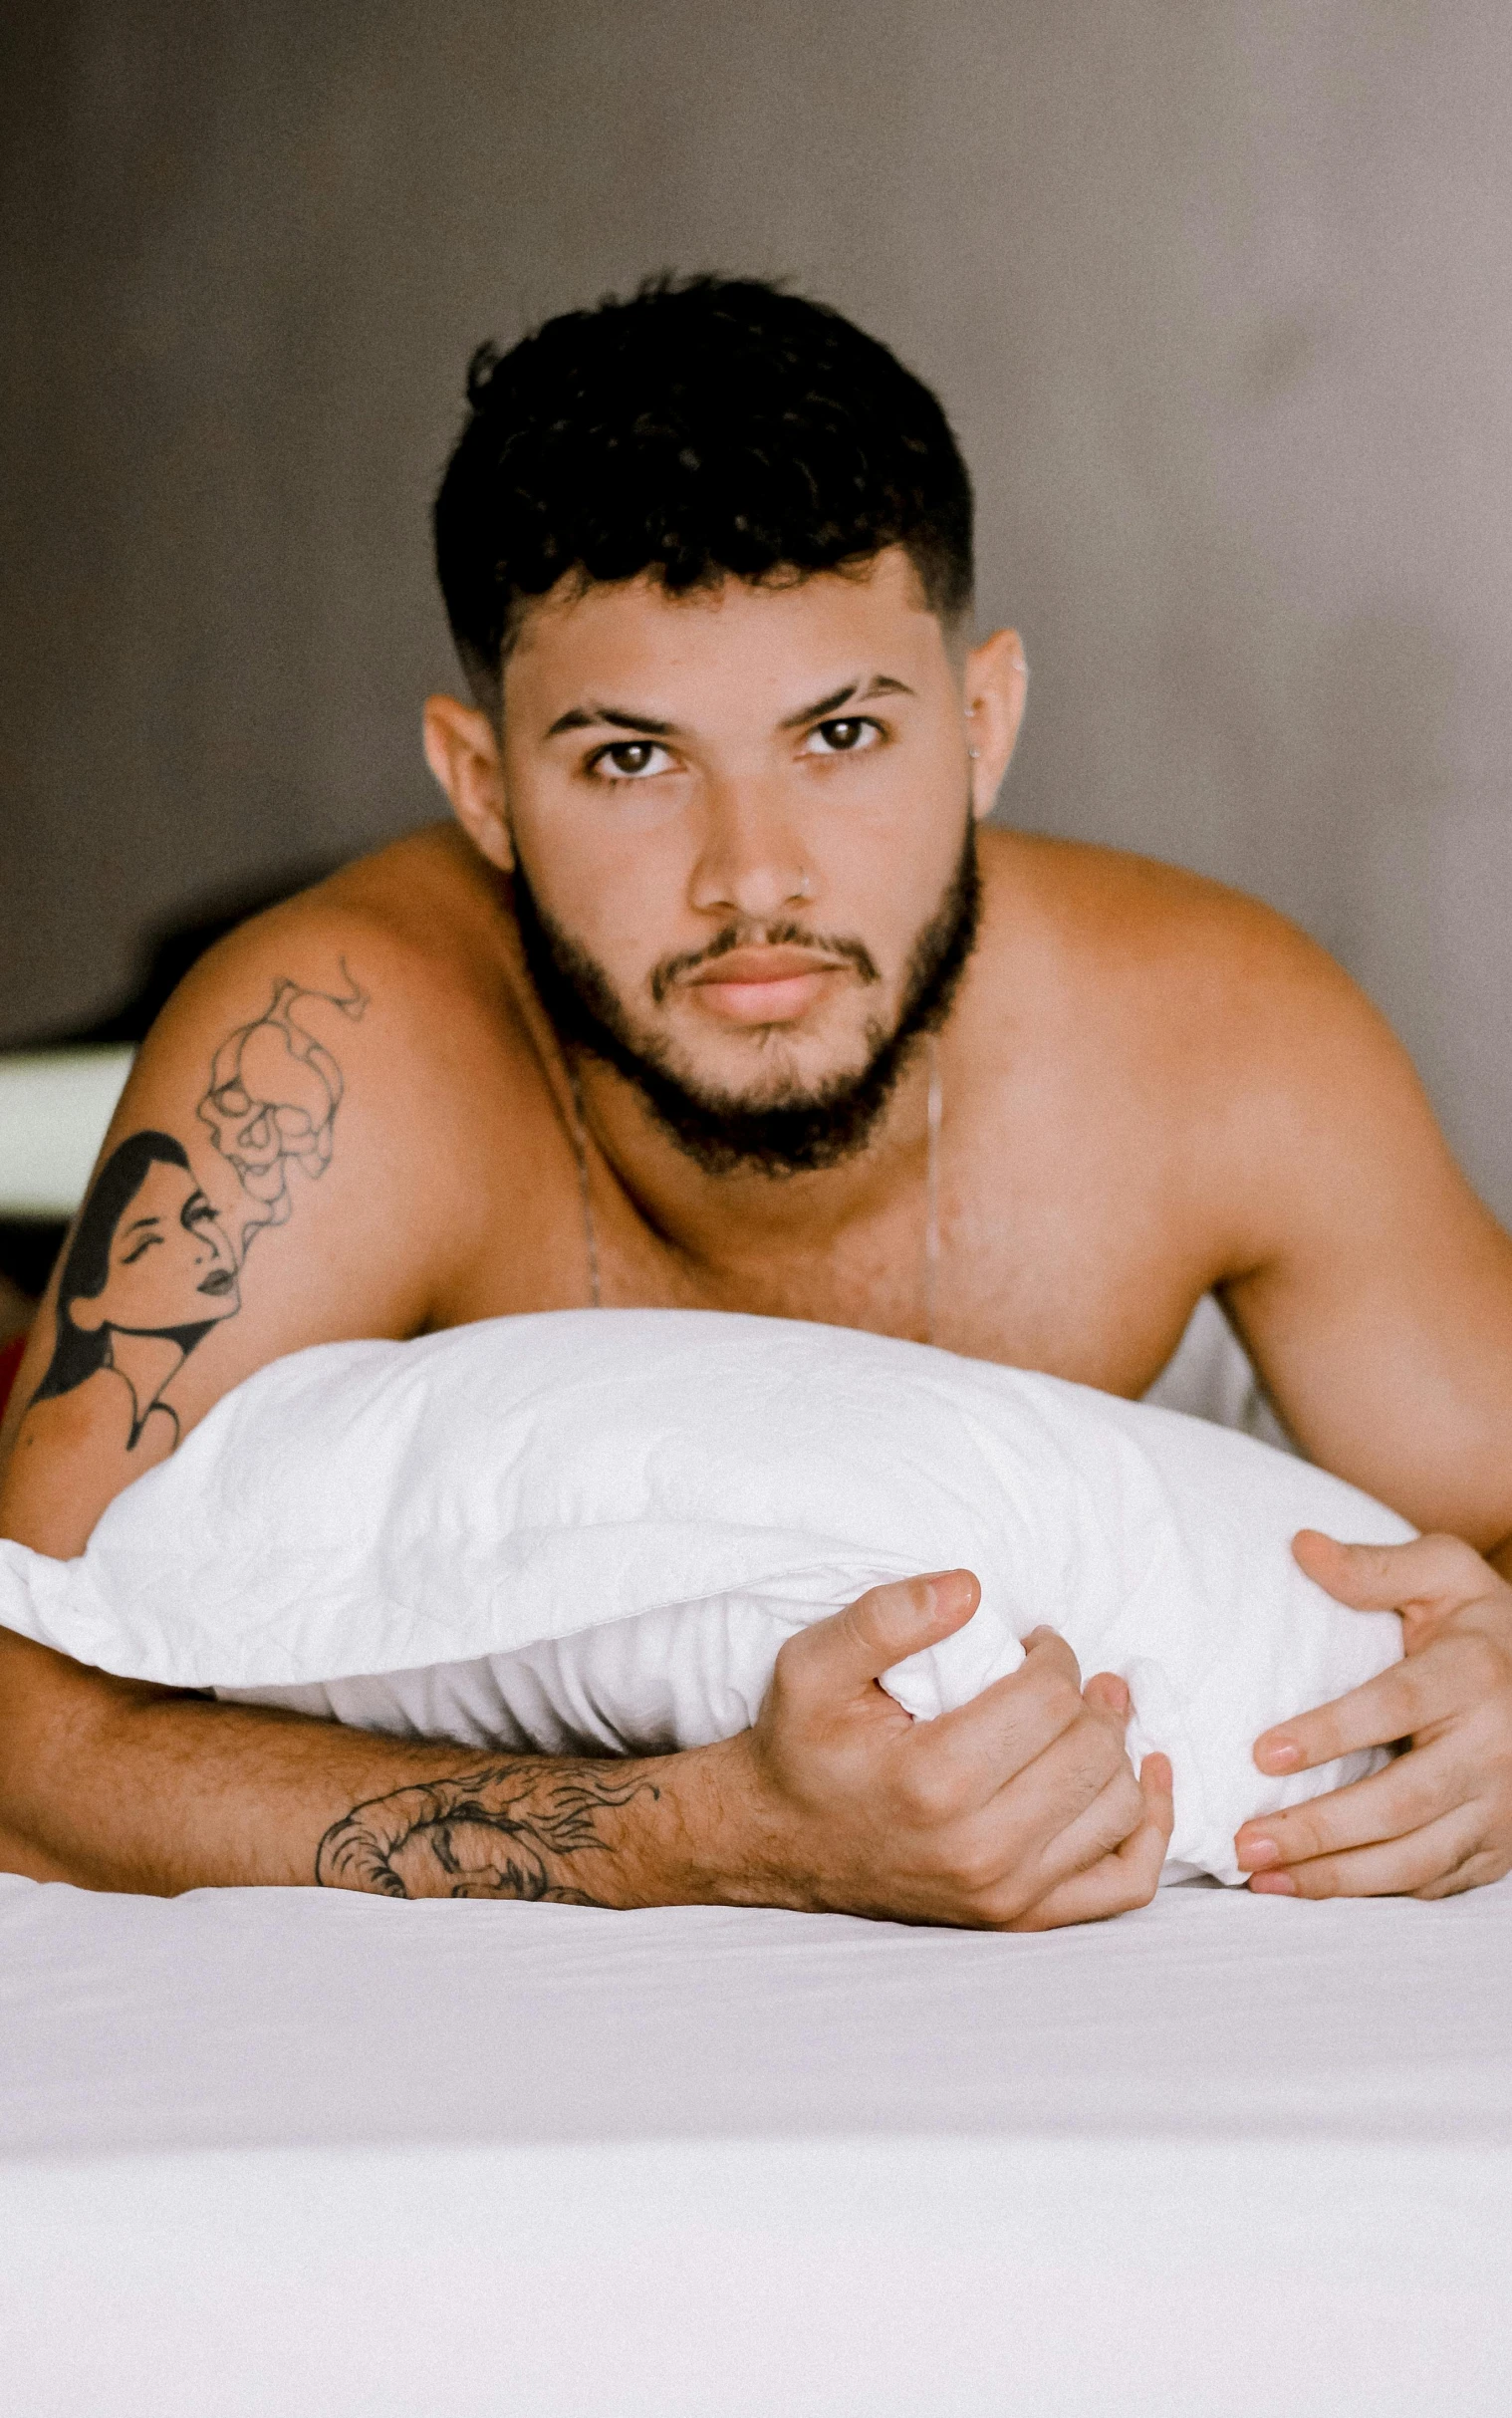 shirtless man laying on bed with white sheets and a pillow